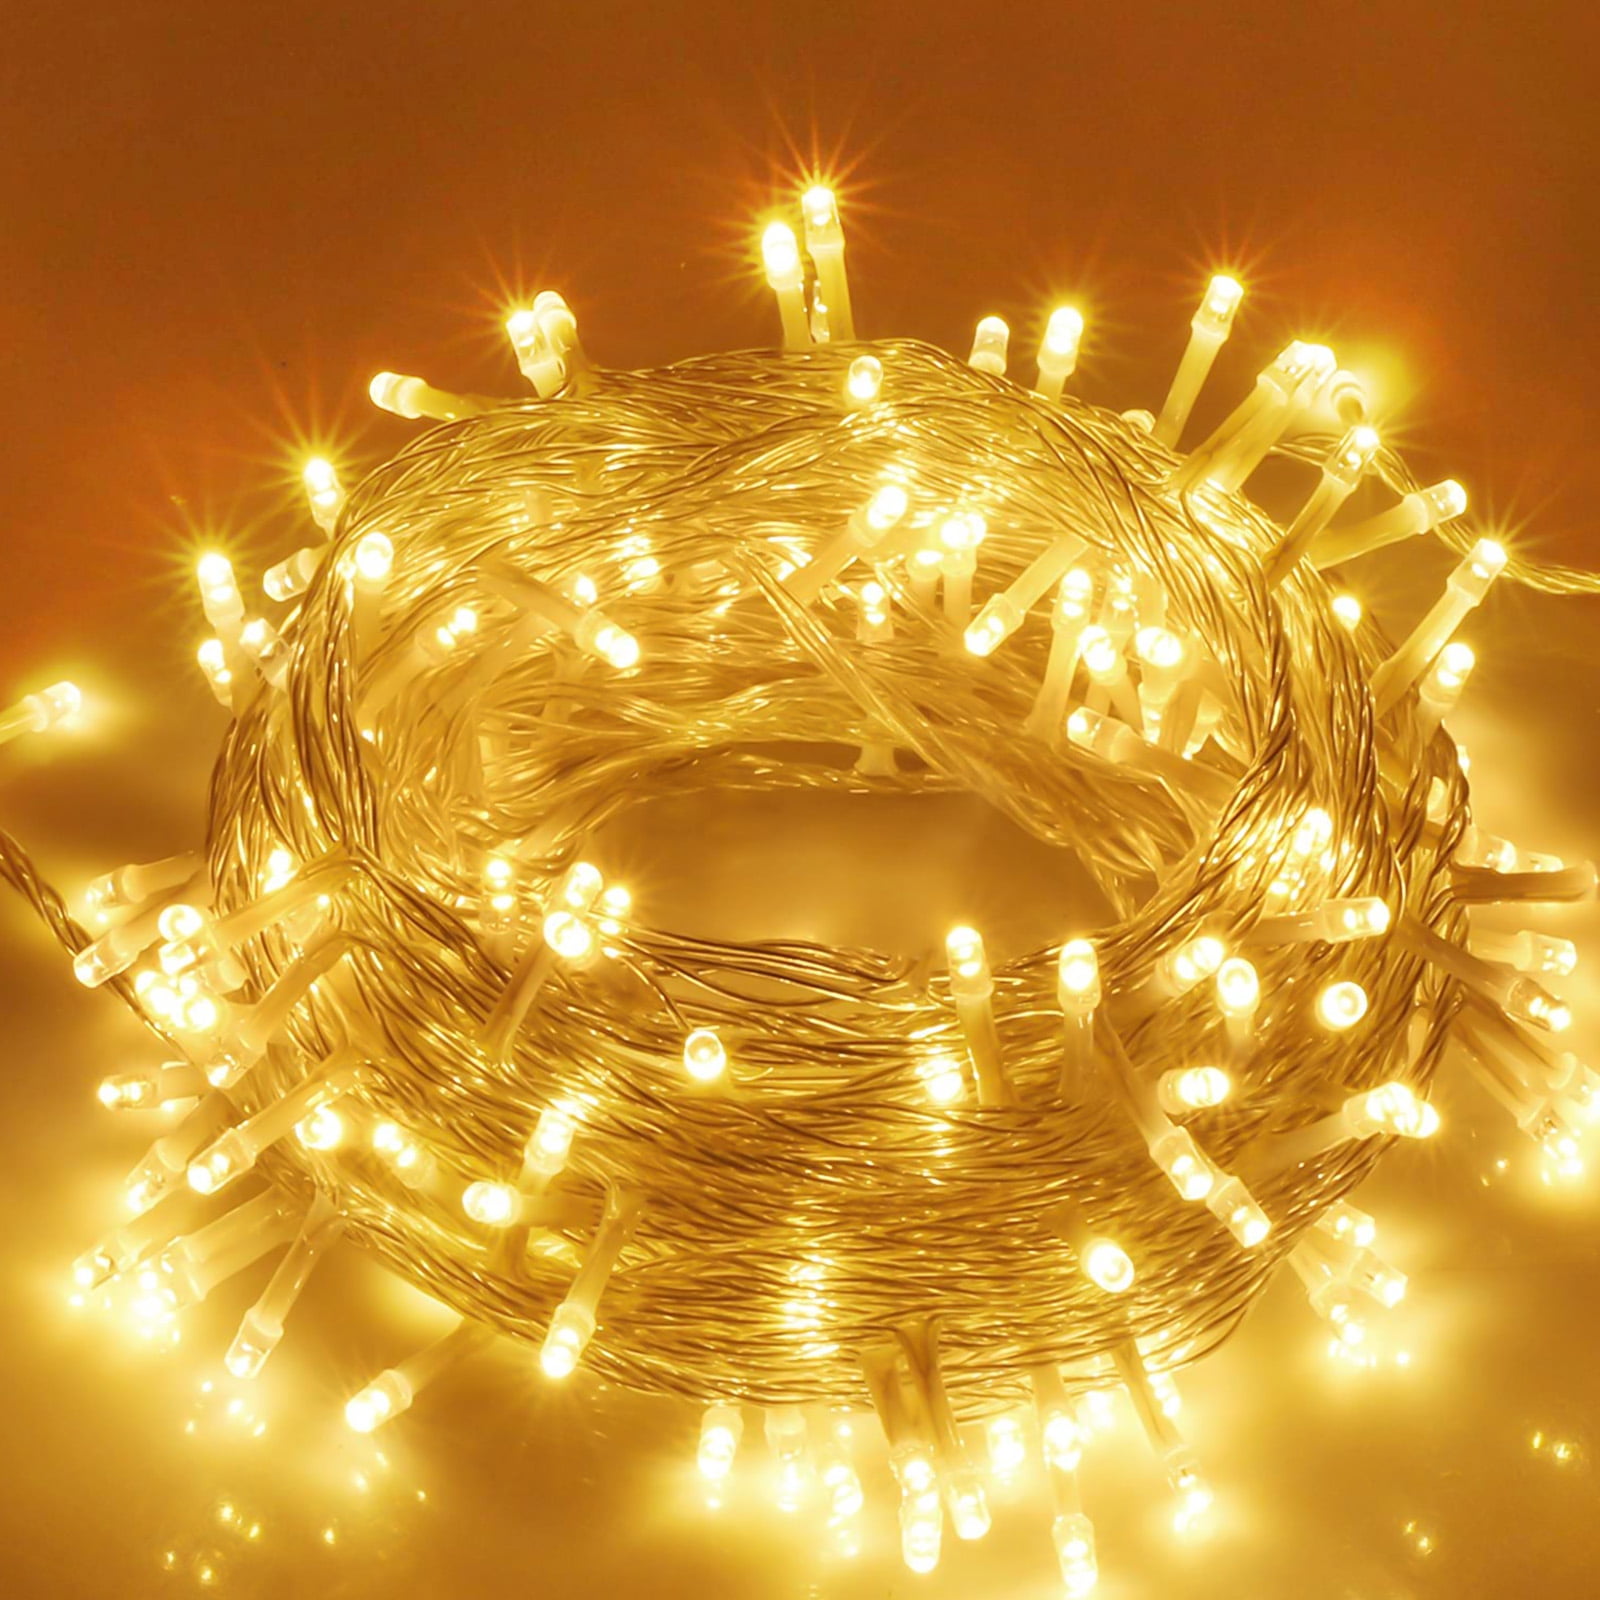 100 LED Copper Wire String Fairy Lights 10M Party Home Garden Decor Warm White 